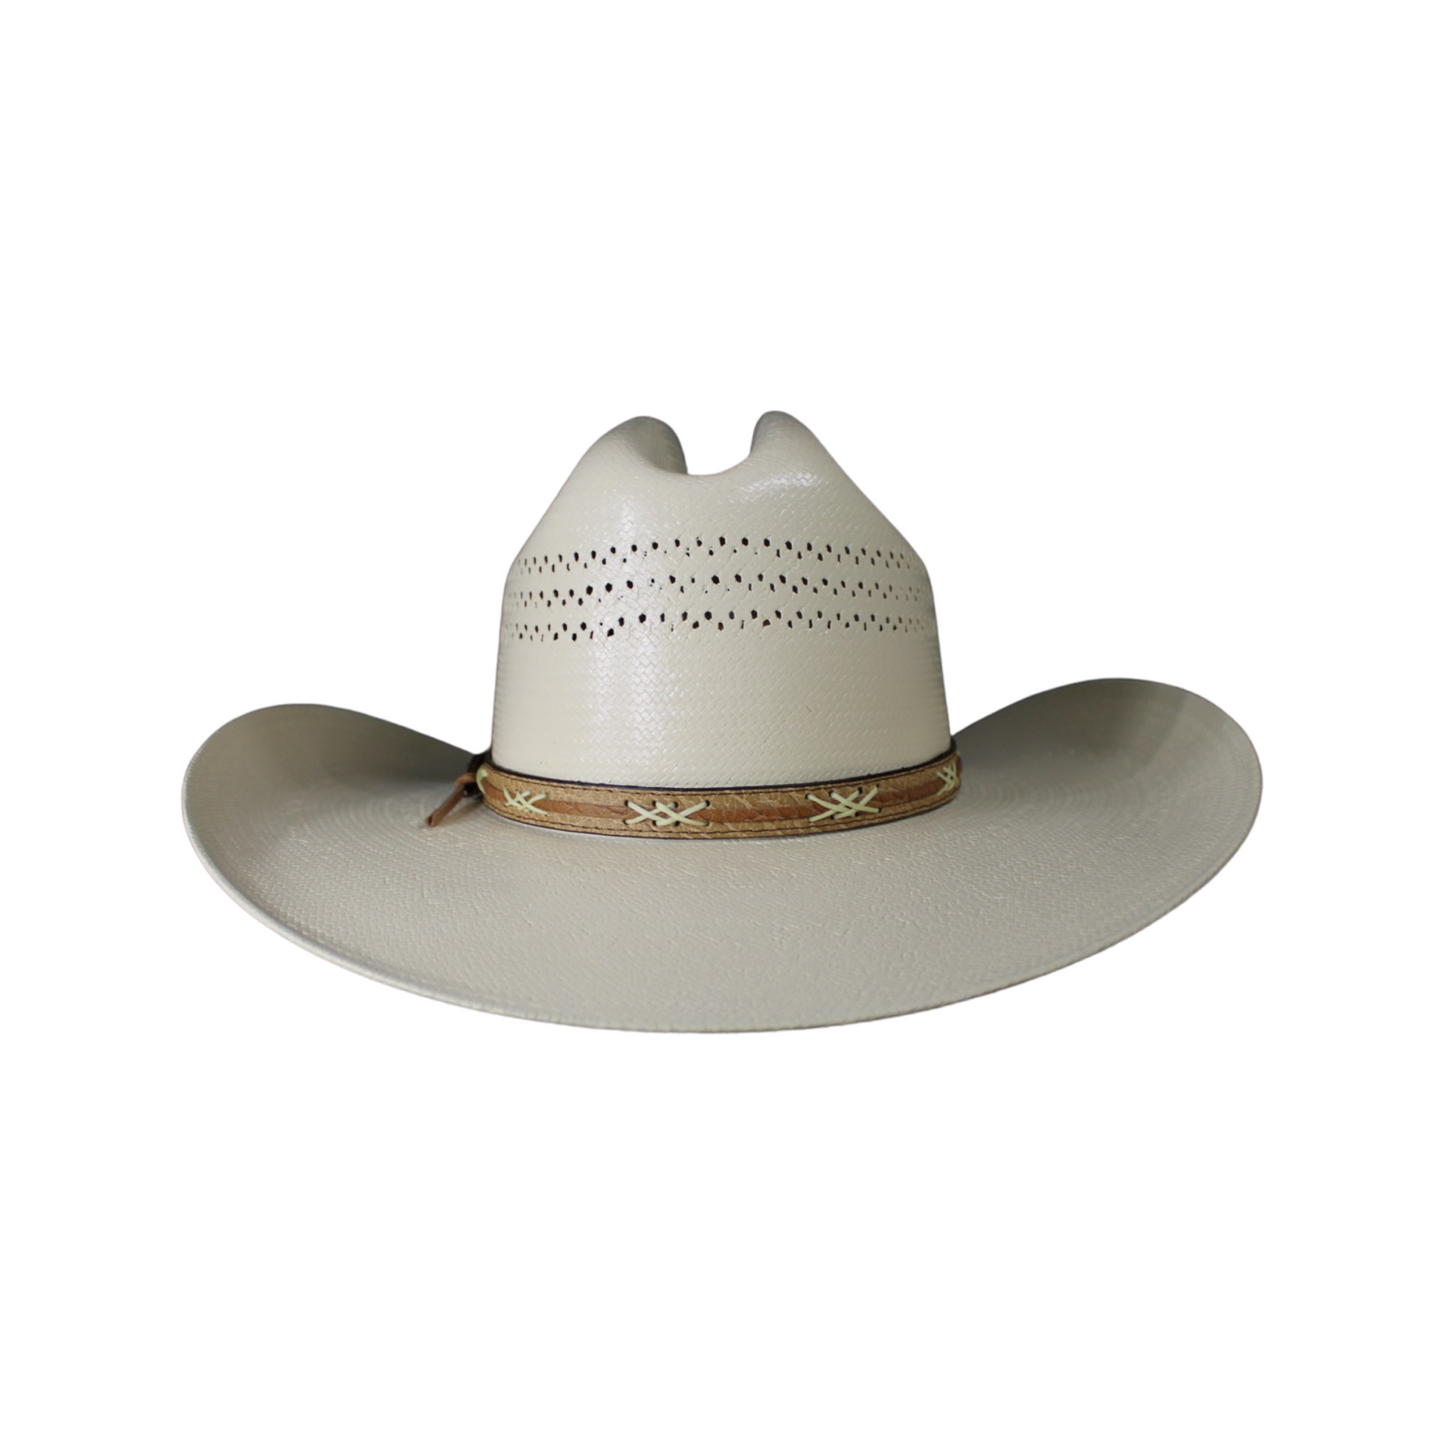 15x Tombstone Straw Hat: Chaparral